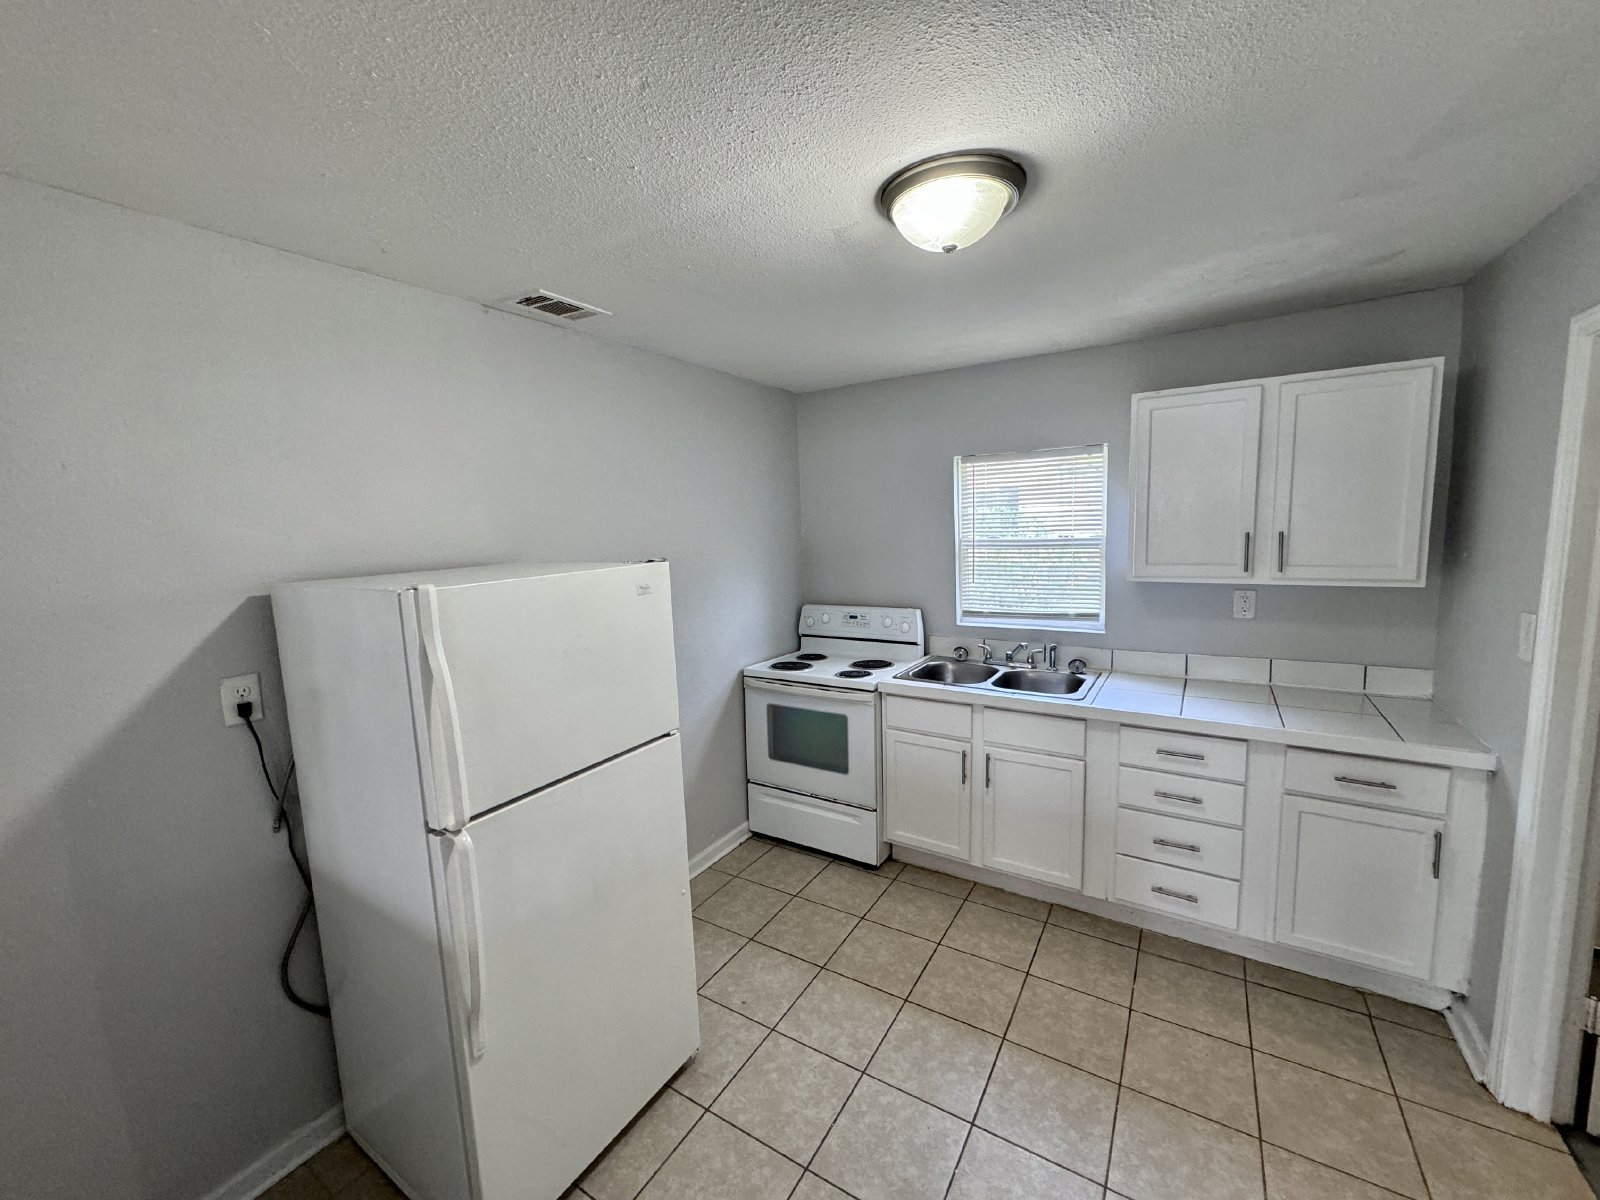 2227 Ct-2 Bed/1 Bath Duplex - Recently Renovated & Move in Ready property image